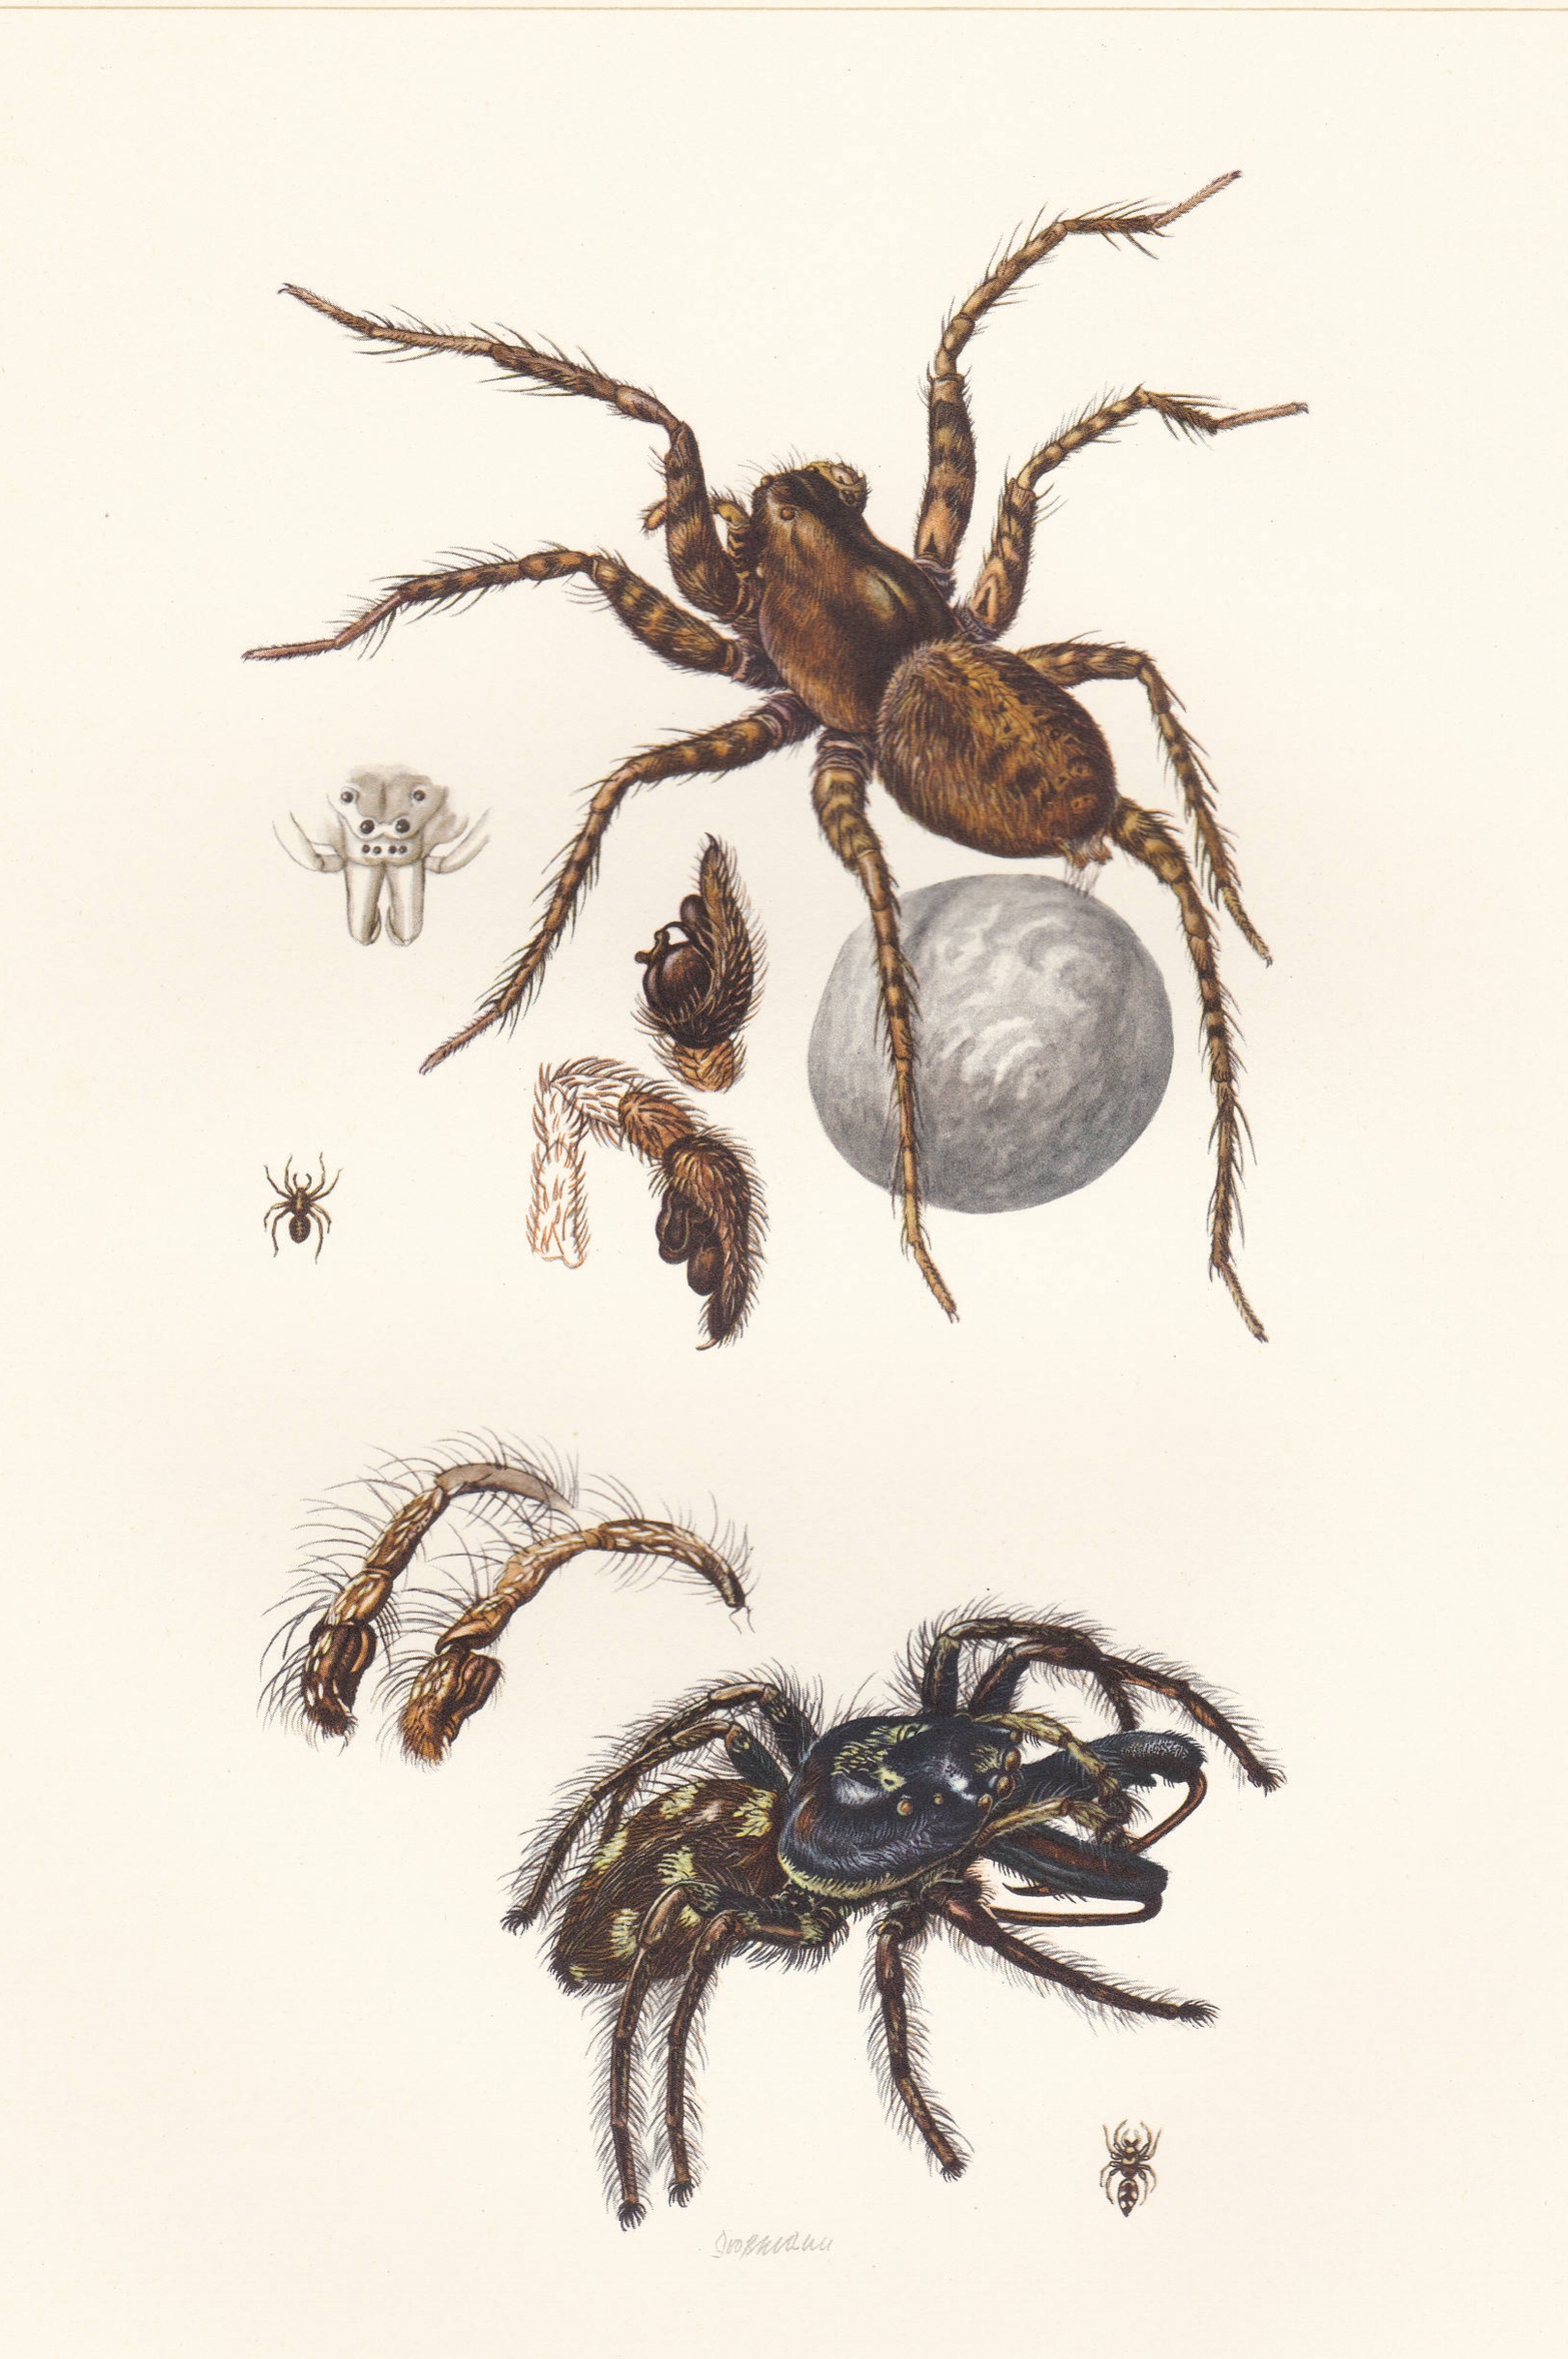 Vintage lithograph of the zebra spider and the wolf spider from 1956